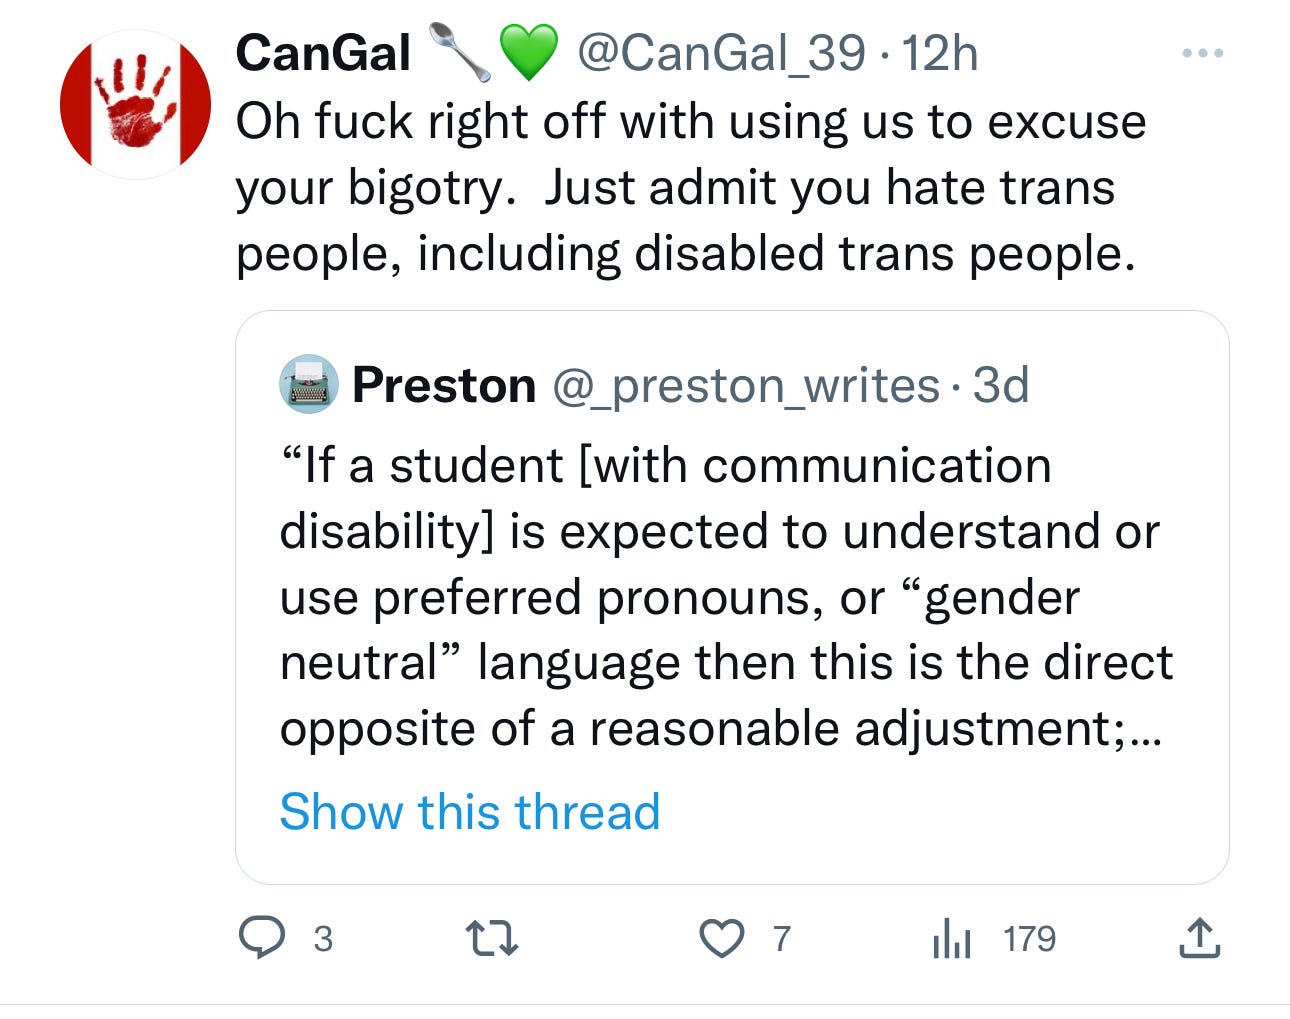 A quote tweet that states CanGal @CanGal_39 Oh fuck right off with using us to excuse your bigotry. Just admit you hate trans people, including disabled trans people. Preston @_preston_writes 3d "If a student [with communication disability] is expected to understand or use preferred pronouns, or "gender neutral" language then this is the direct opposite of a reasonable adjustment